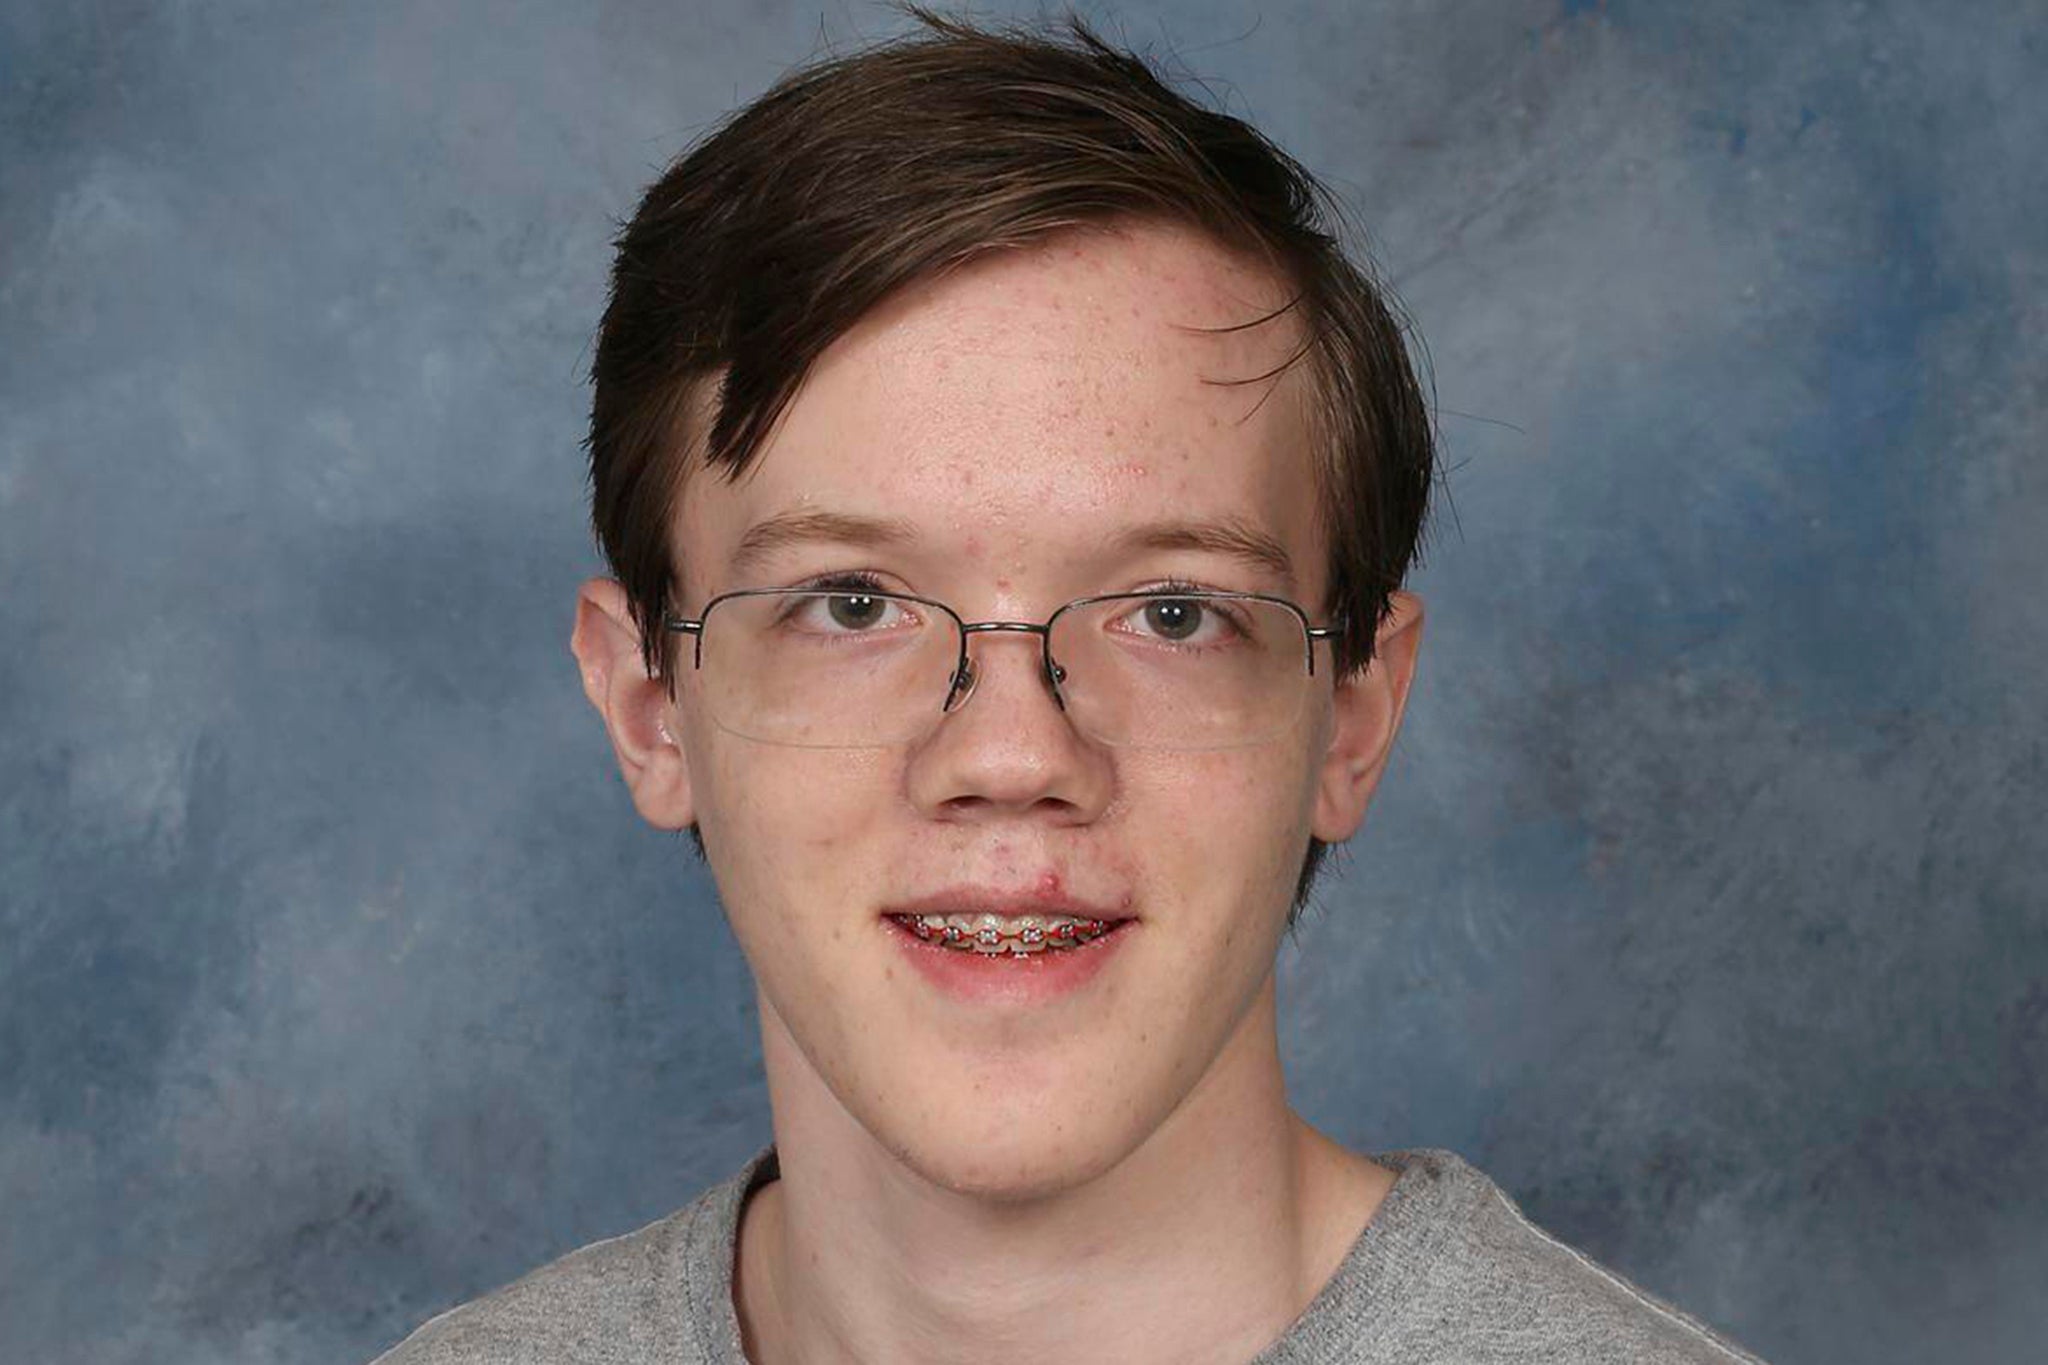 Shooter Thomas Crooks is pictured in a yearbook photo